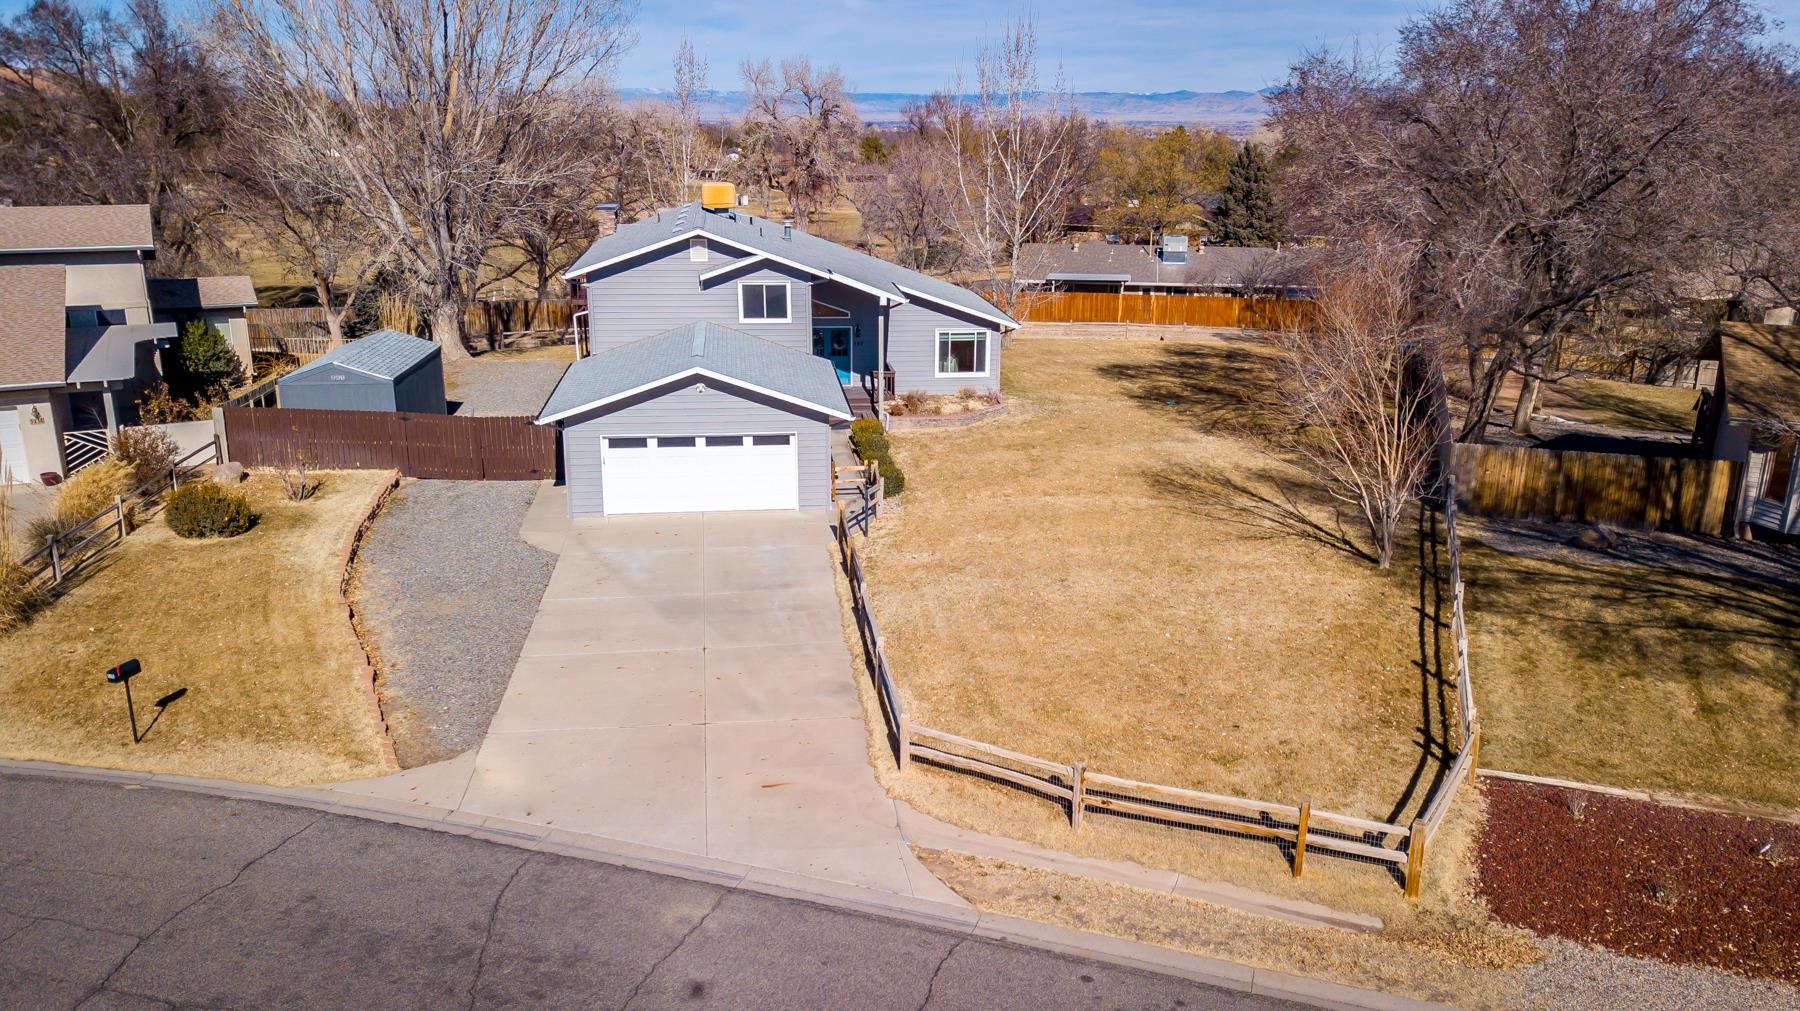 Take a look at this incredible home in a fantastic location. There is so much to appreciate about this Redlands gem, with too many improvements to list, please come take a look at this one yourself. The views of the Colorado National Monument are jaw dropping, from the second story deck you can see for miles. Open and bright as you enter the home, vaulted ceilings and ample windows (2018) let all the natural light pour inside. Extensive counter space and cabinet storage in the updated kitchen, all appliances stay. Bonus spaces abound in this home with a separate dining area, family room with new gas fireplace, and office upstairs. Primary bedroom with ensuite 3/4 bath and walk in closet is upstairs, along with two additional bedrooms and a full bath. The largest bedroom is on the main level and has convenient access to the nearby 3/4 bath and laundry room. The entire yard is enclosed with either a cedar split rail fence with welded wire (2022) or the adjoining privacy fences. Take advantage of additional outdoor storage with RV parking and a new 10 X 20 shed (2022). Irrigation system has been overhauled with new pump and display box in 2021 and new electrical box in 2023.